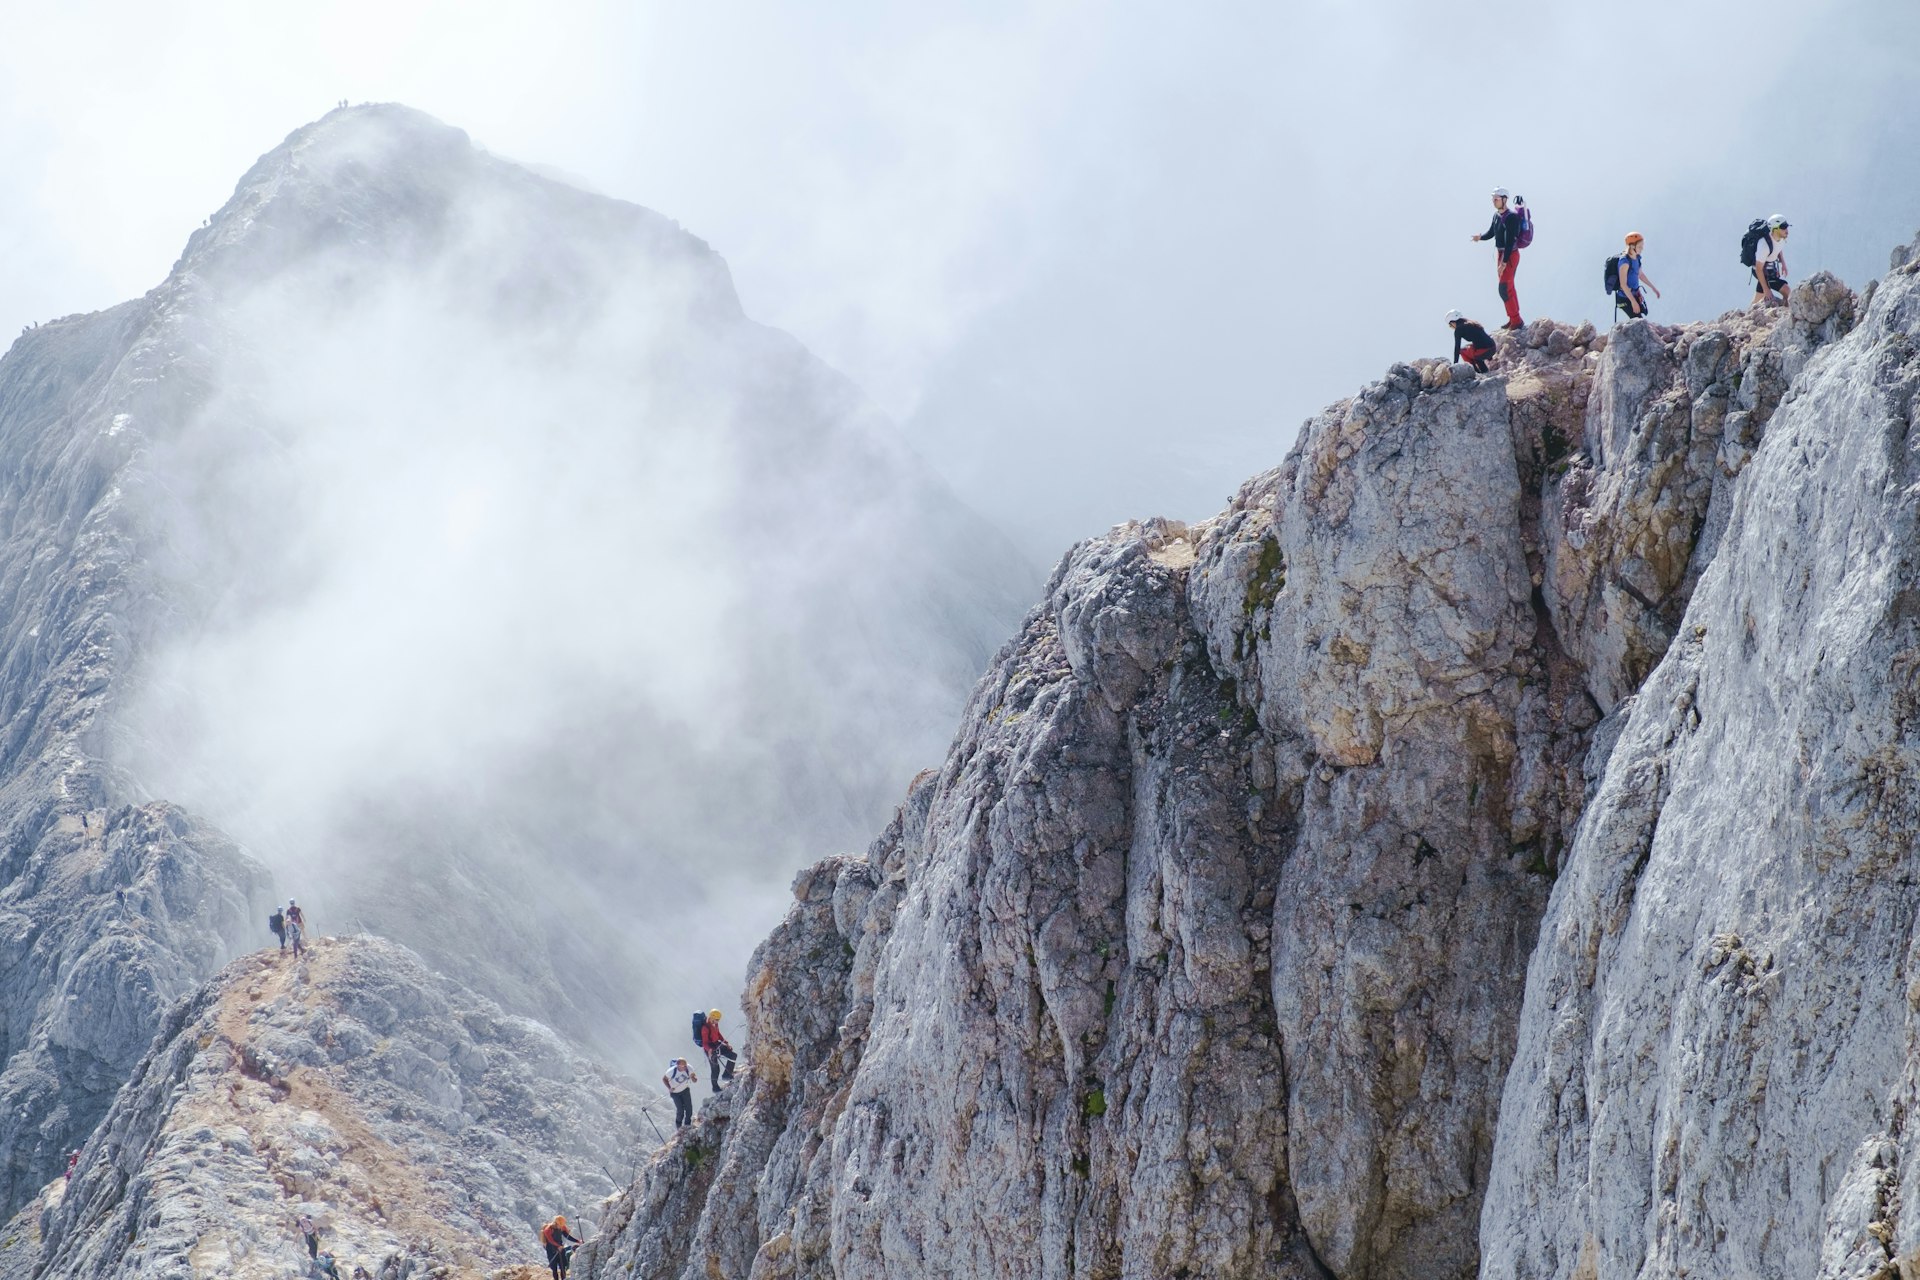 Climbers on the top of a jagged mountain trail